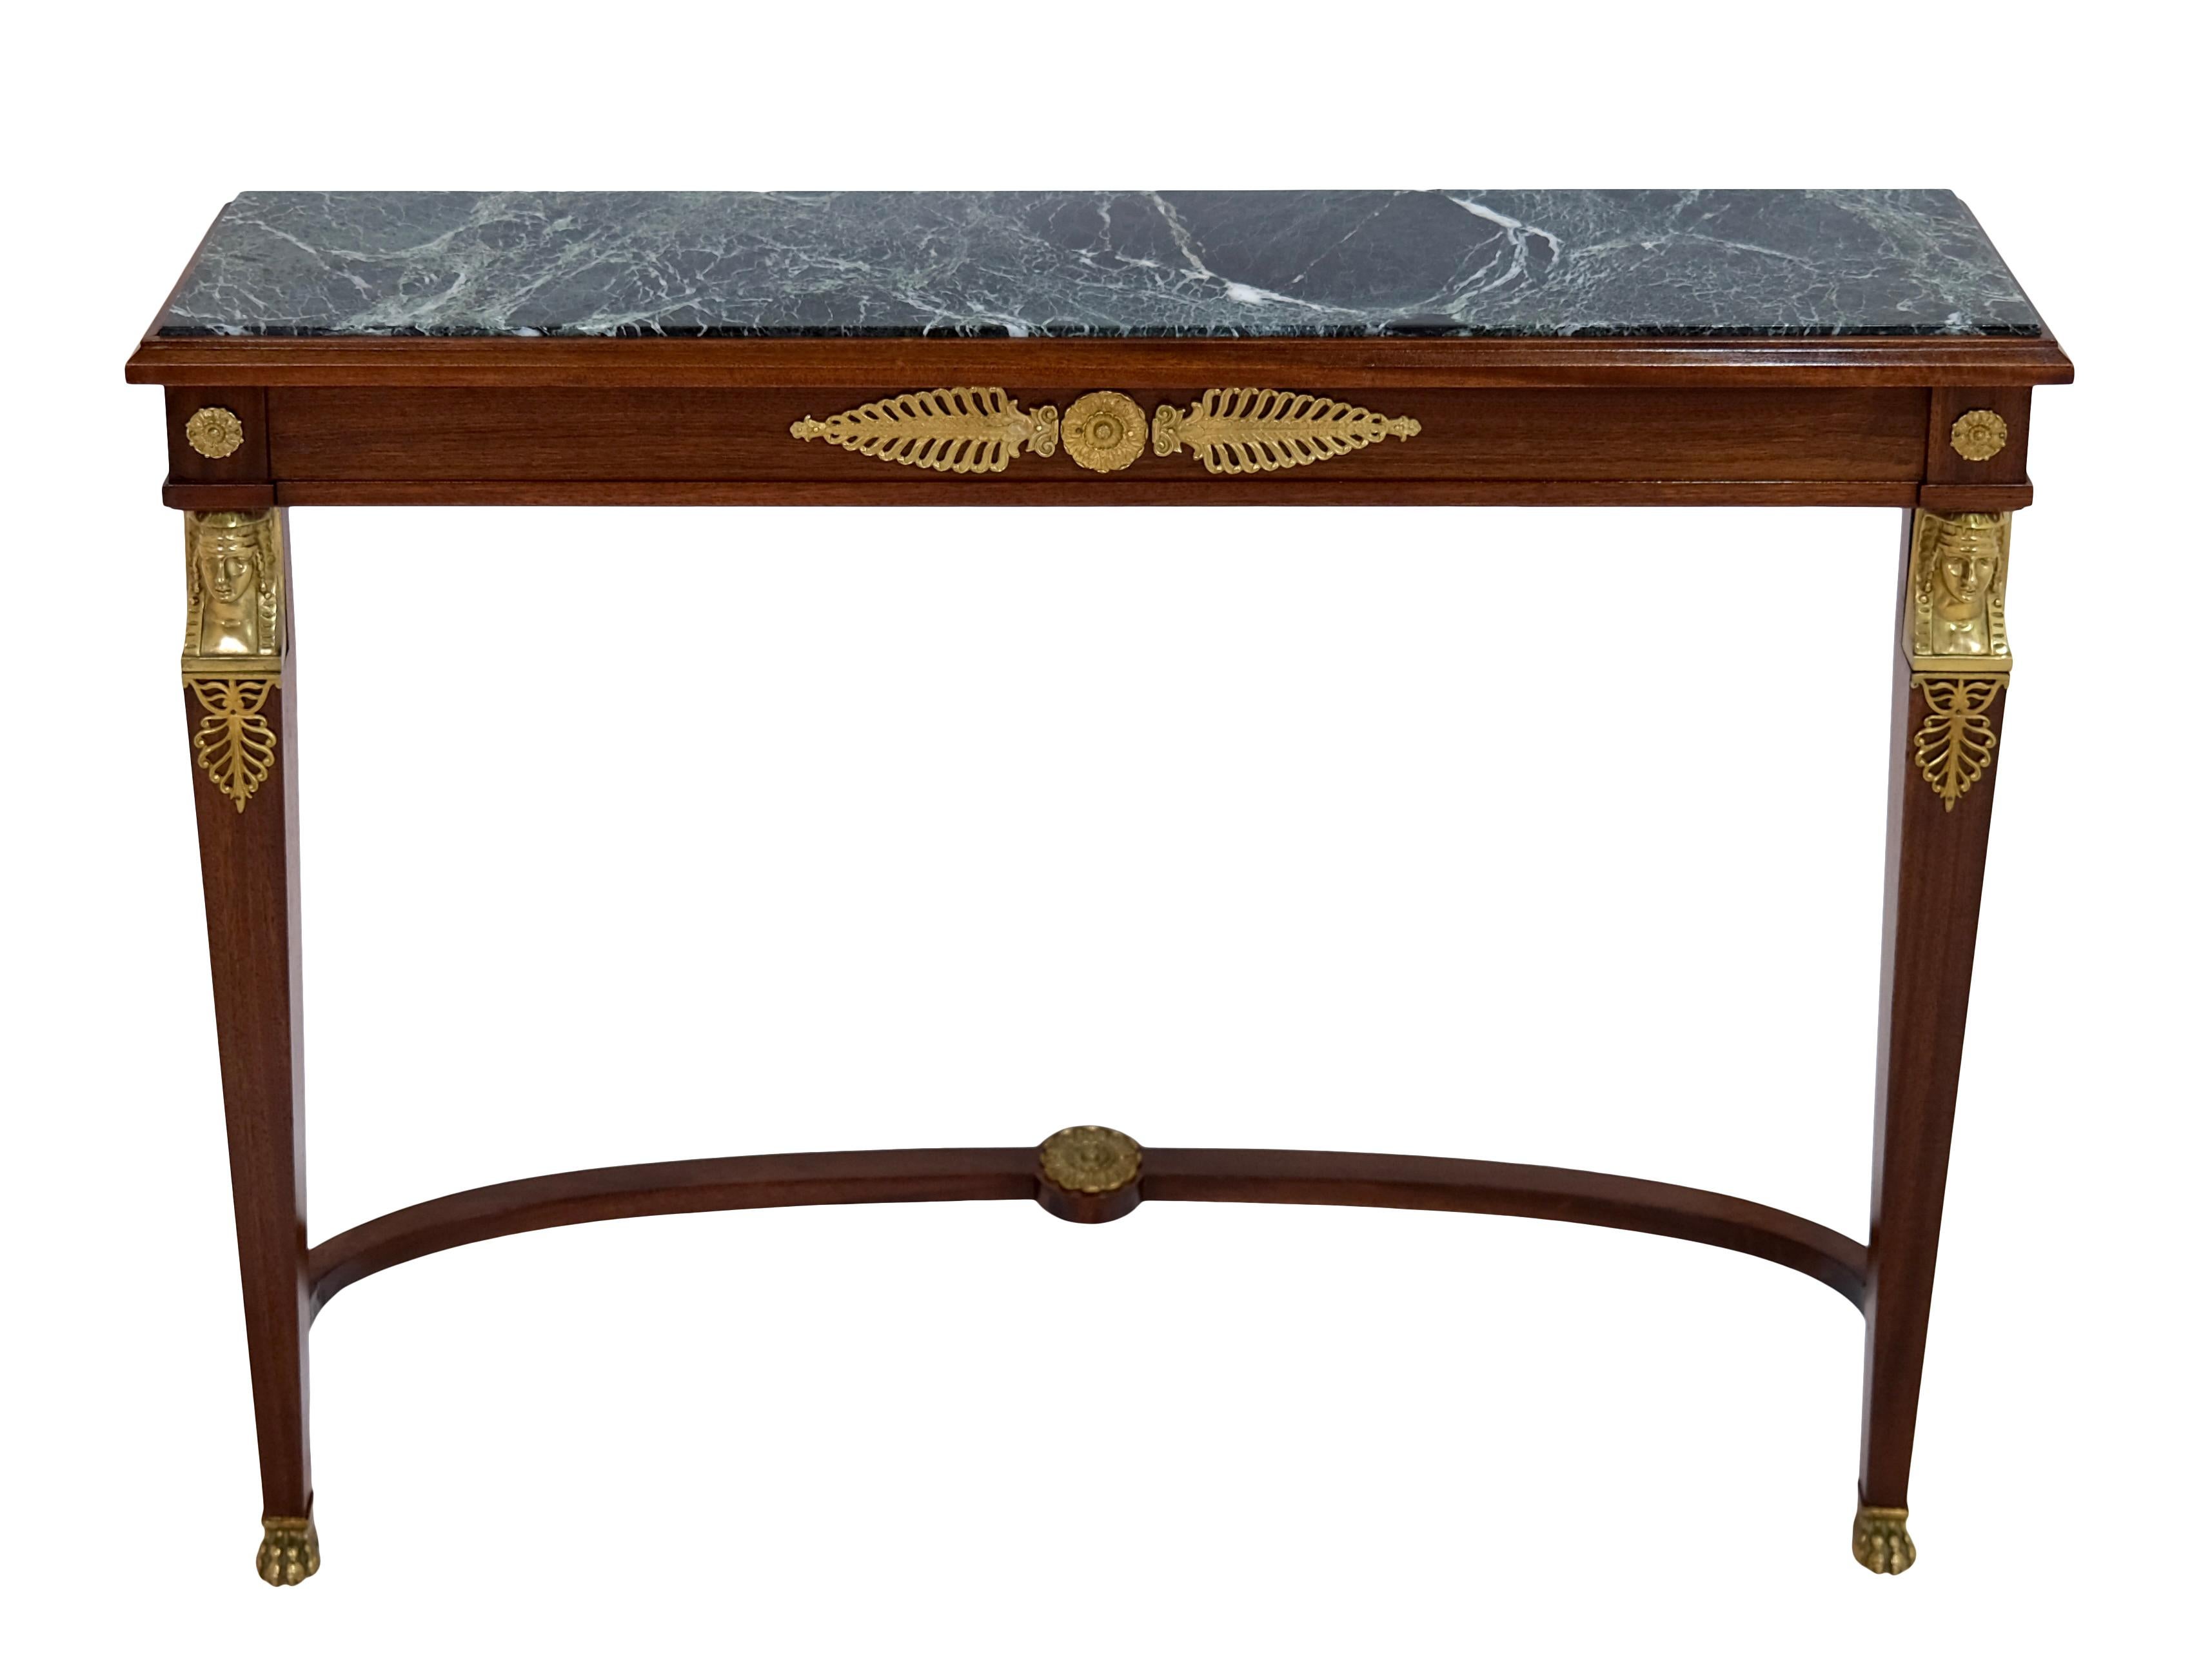 Console, also available as a pair
mahogany, shellac hand polished
Marble top
All fittings and bronzes original

Empire (2nd period), France 1850/60s

Dimensions:
Width: 110 cm
Height: 86 cm
Depth: 25 cm